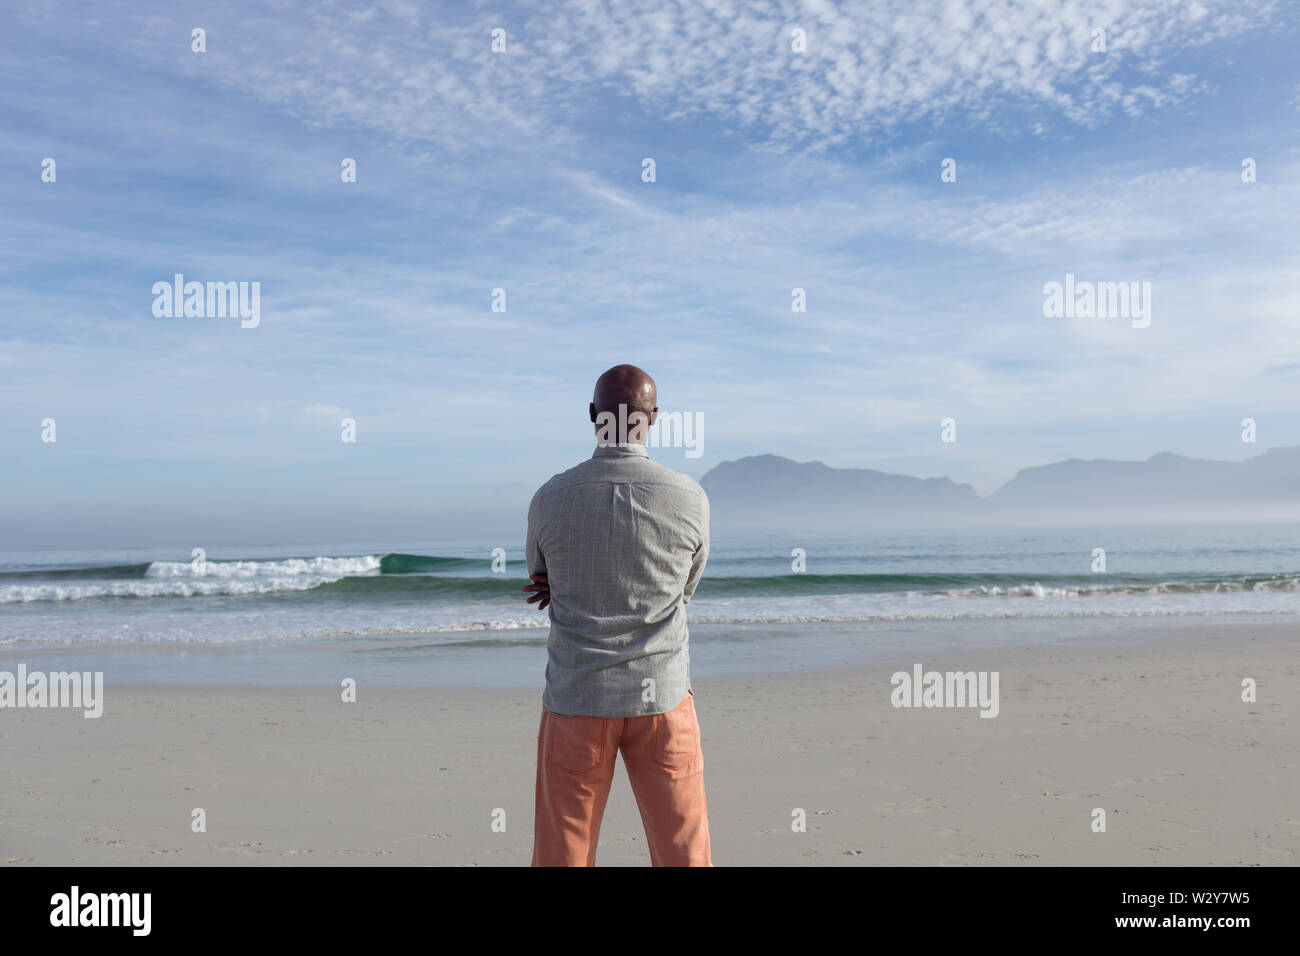 Man with gazing at the beach. Stock Photo